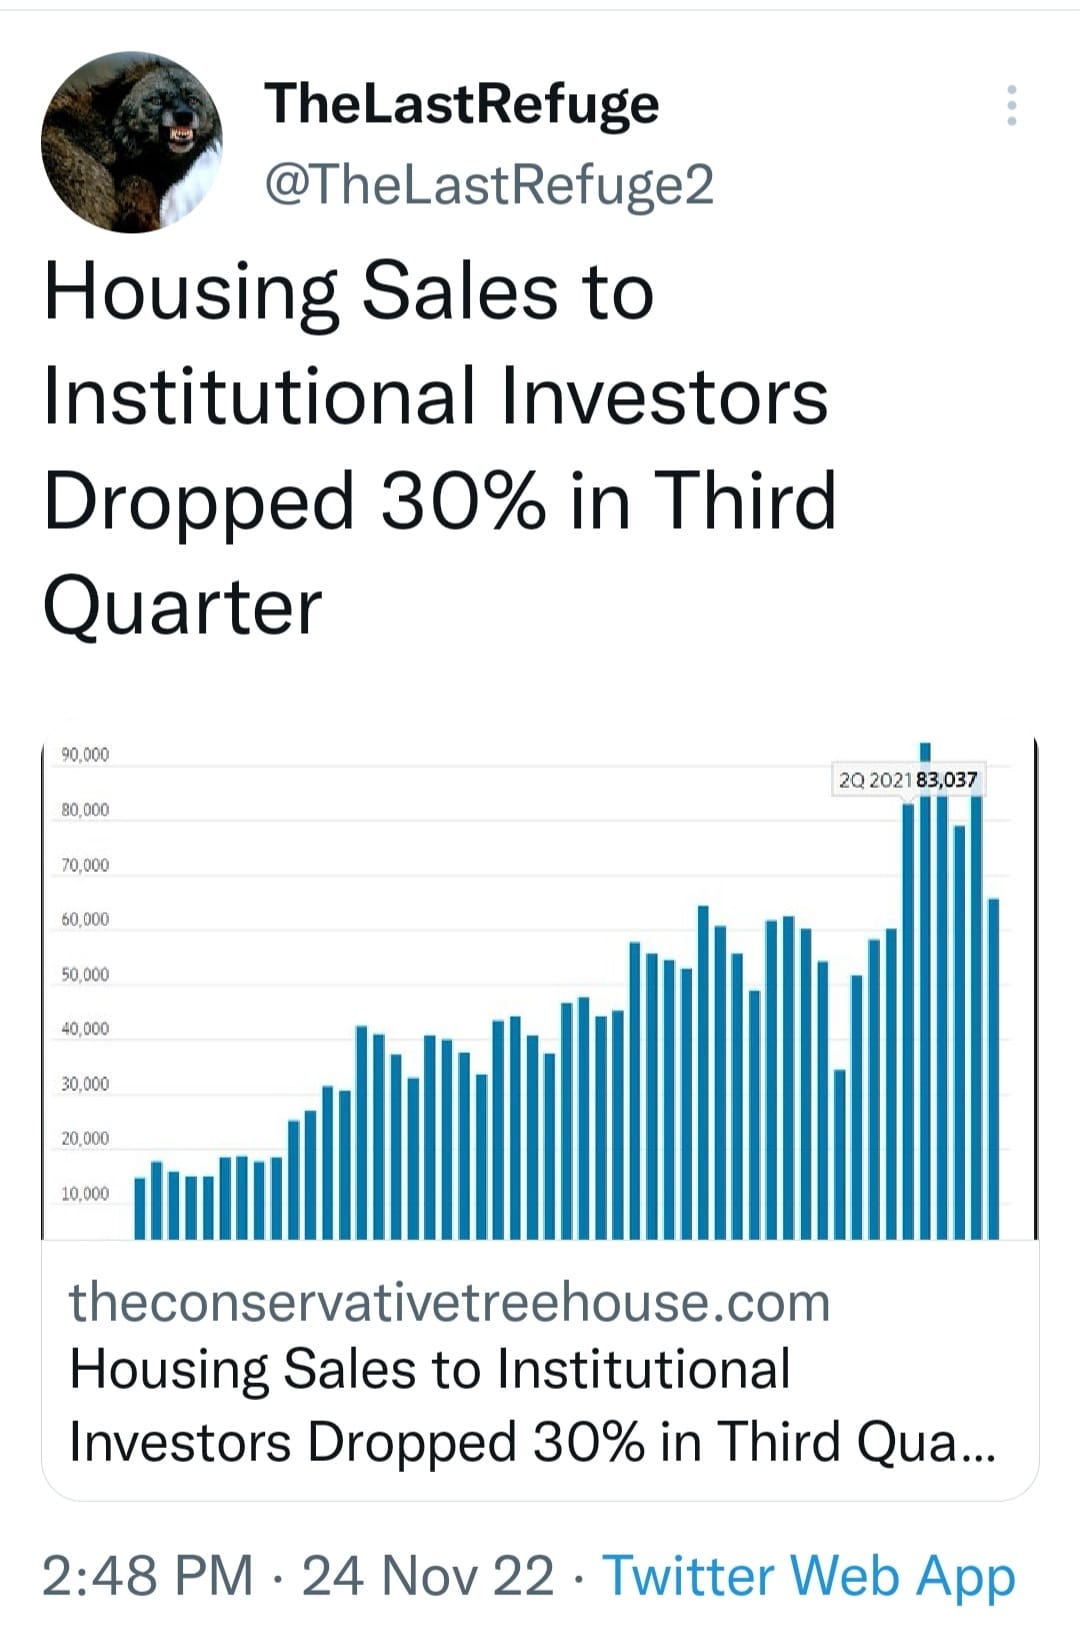 May be an image of text that says 'TheLastRefuge @TheLastRefuge2 Housing Sales to Institutional Investors Dropped 30% in Third Quarter 90,000 80,000 70,000 60,000 2Q2021 3,037 50,000 40,000 30,000 20,000 10,000 theconservativetreehouse.com Housing Sales to Institutional Investors Dropped 30% in Third Qua... 2:48 PM 24 Nov 22 Twitter Web App'